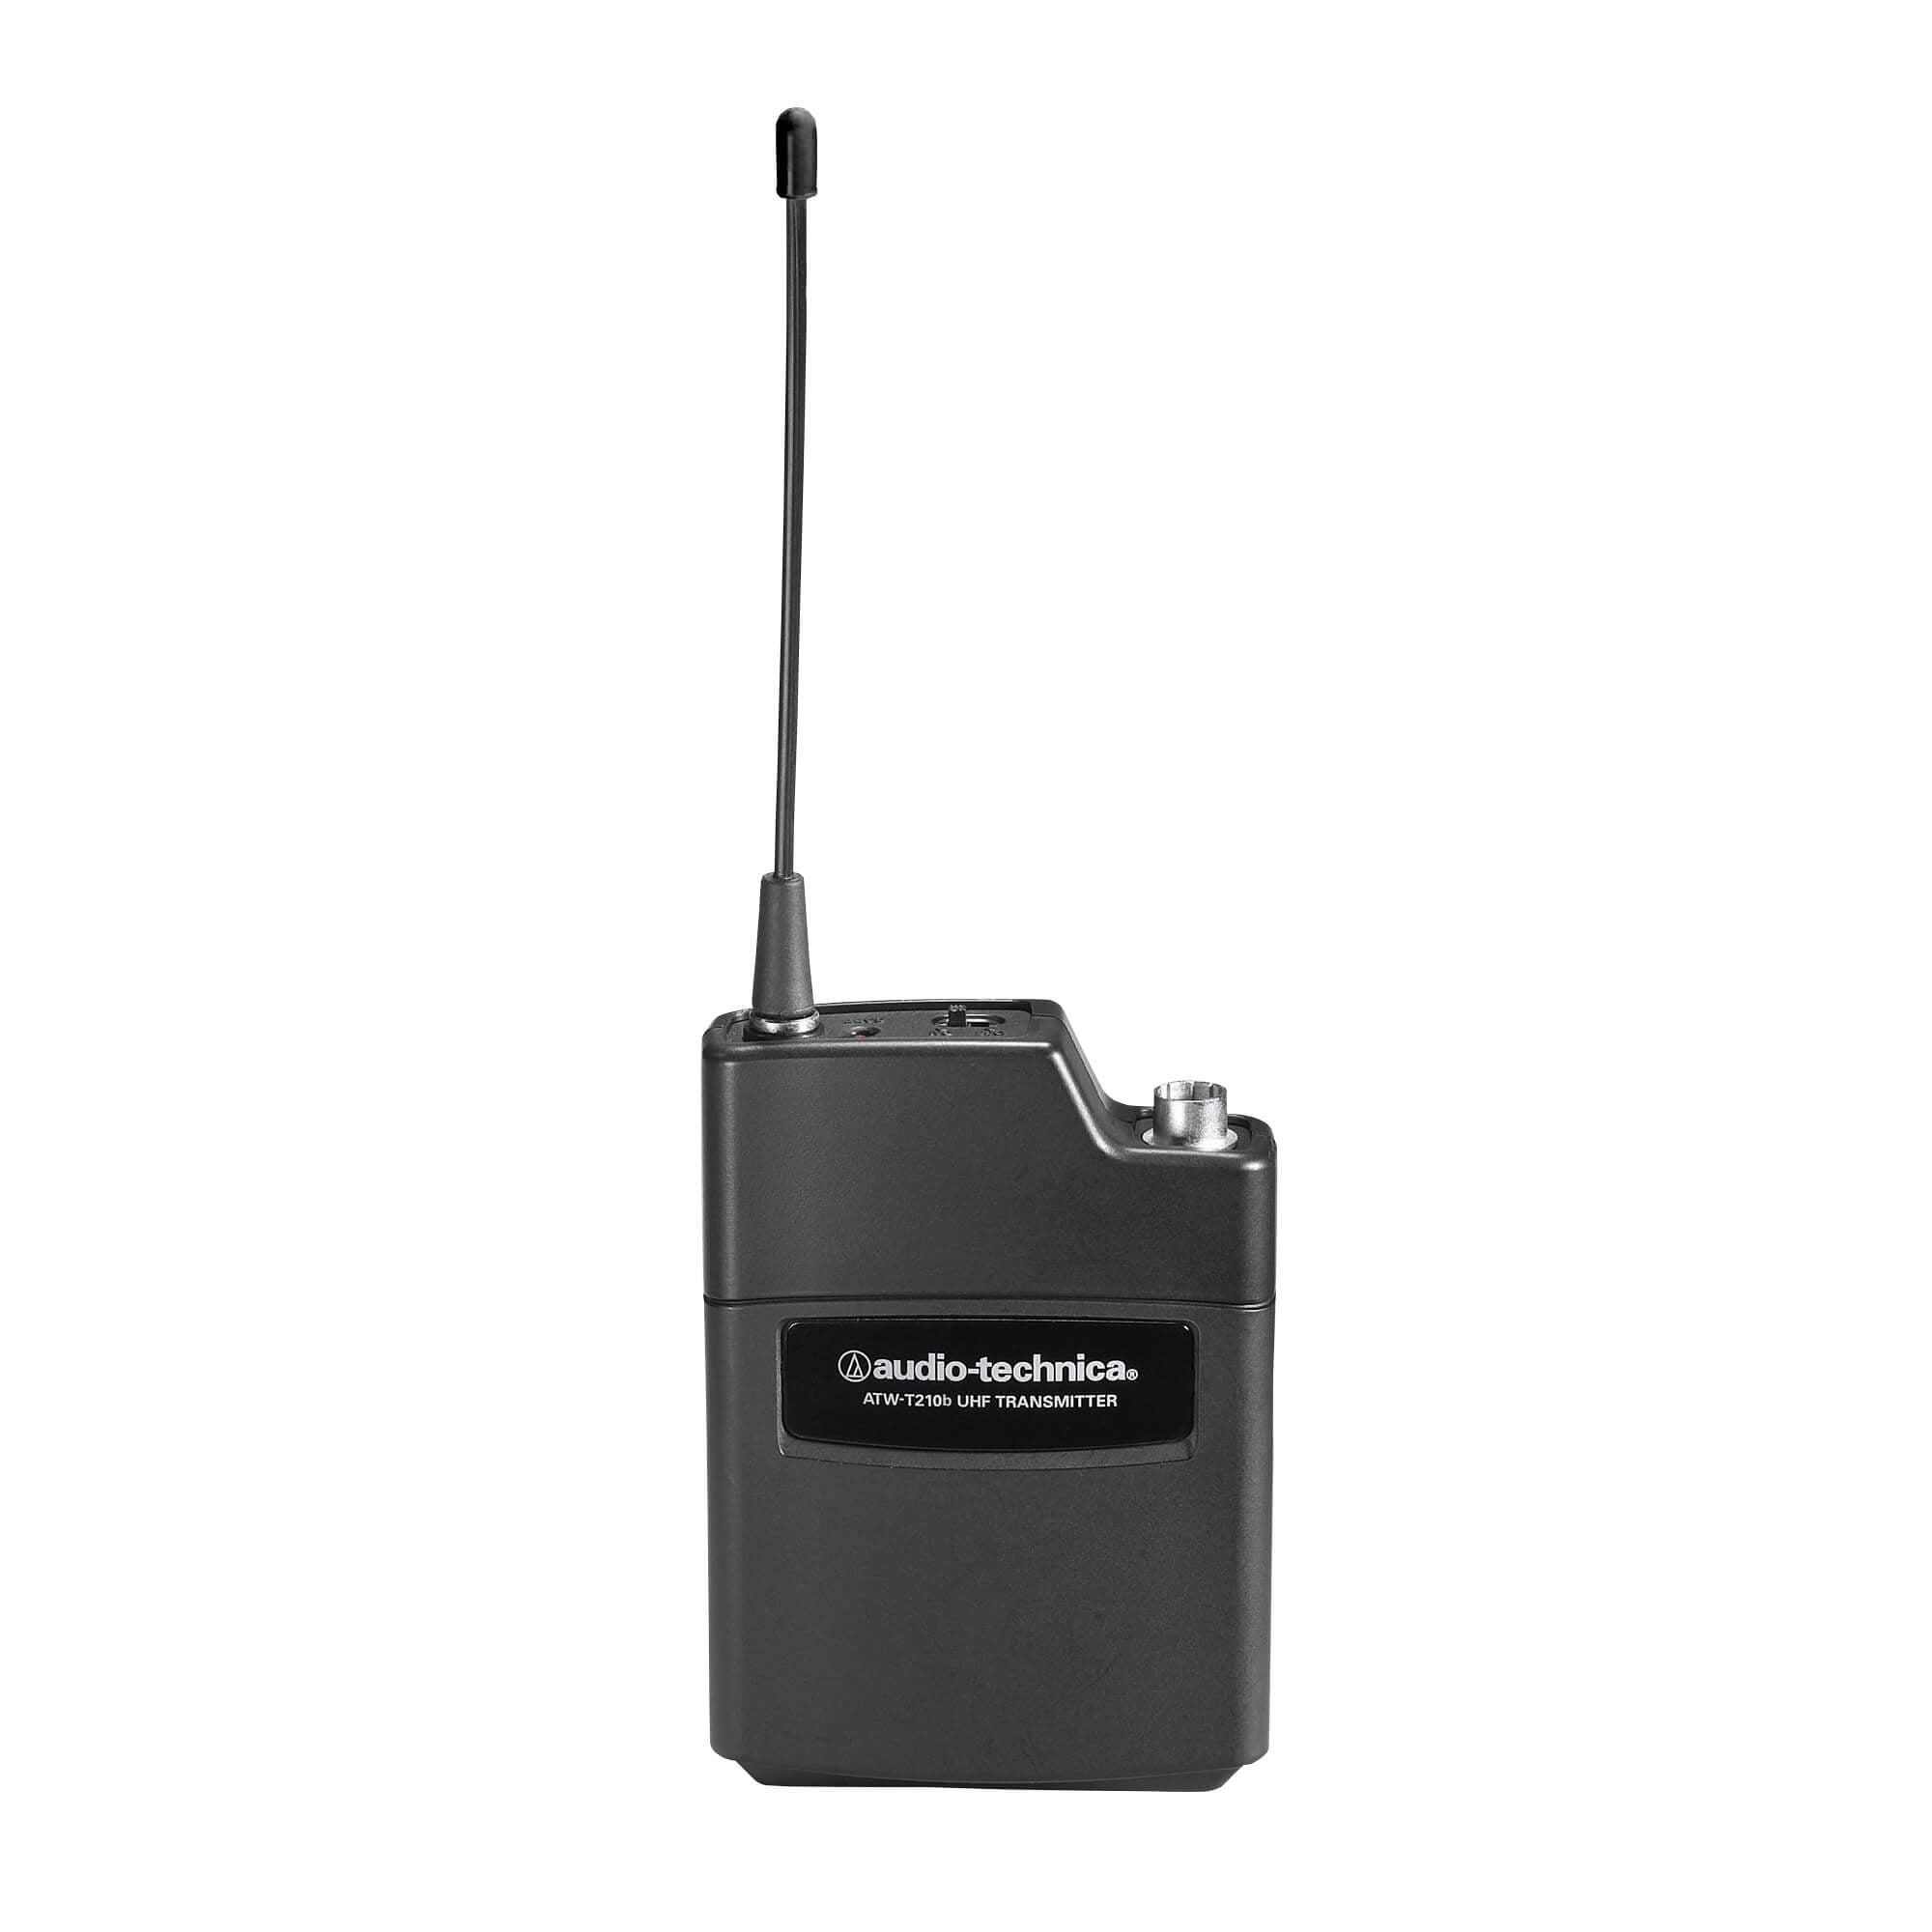 Audio-Technica ATW-T210b transmitter, front